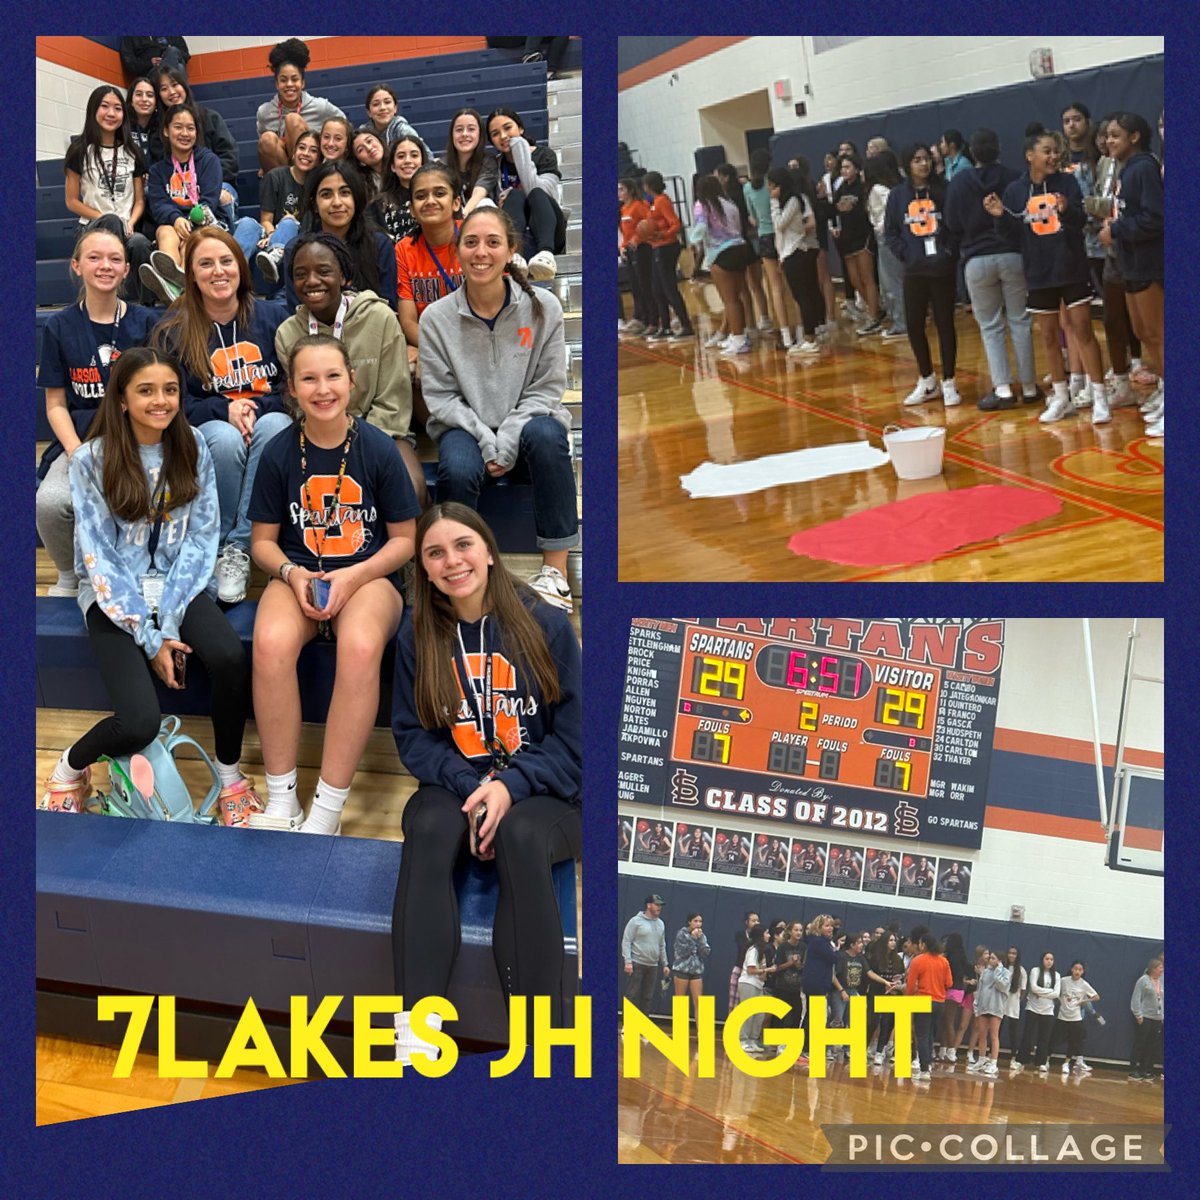 7Lakes JH Night at SLHS. We had a great night supporting the Spartans!  #7LPride